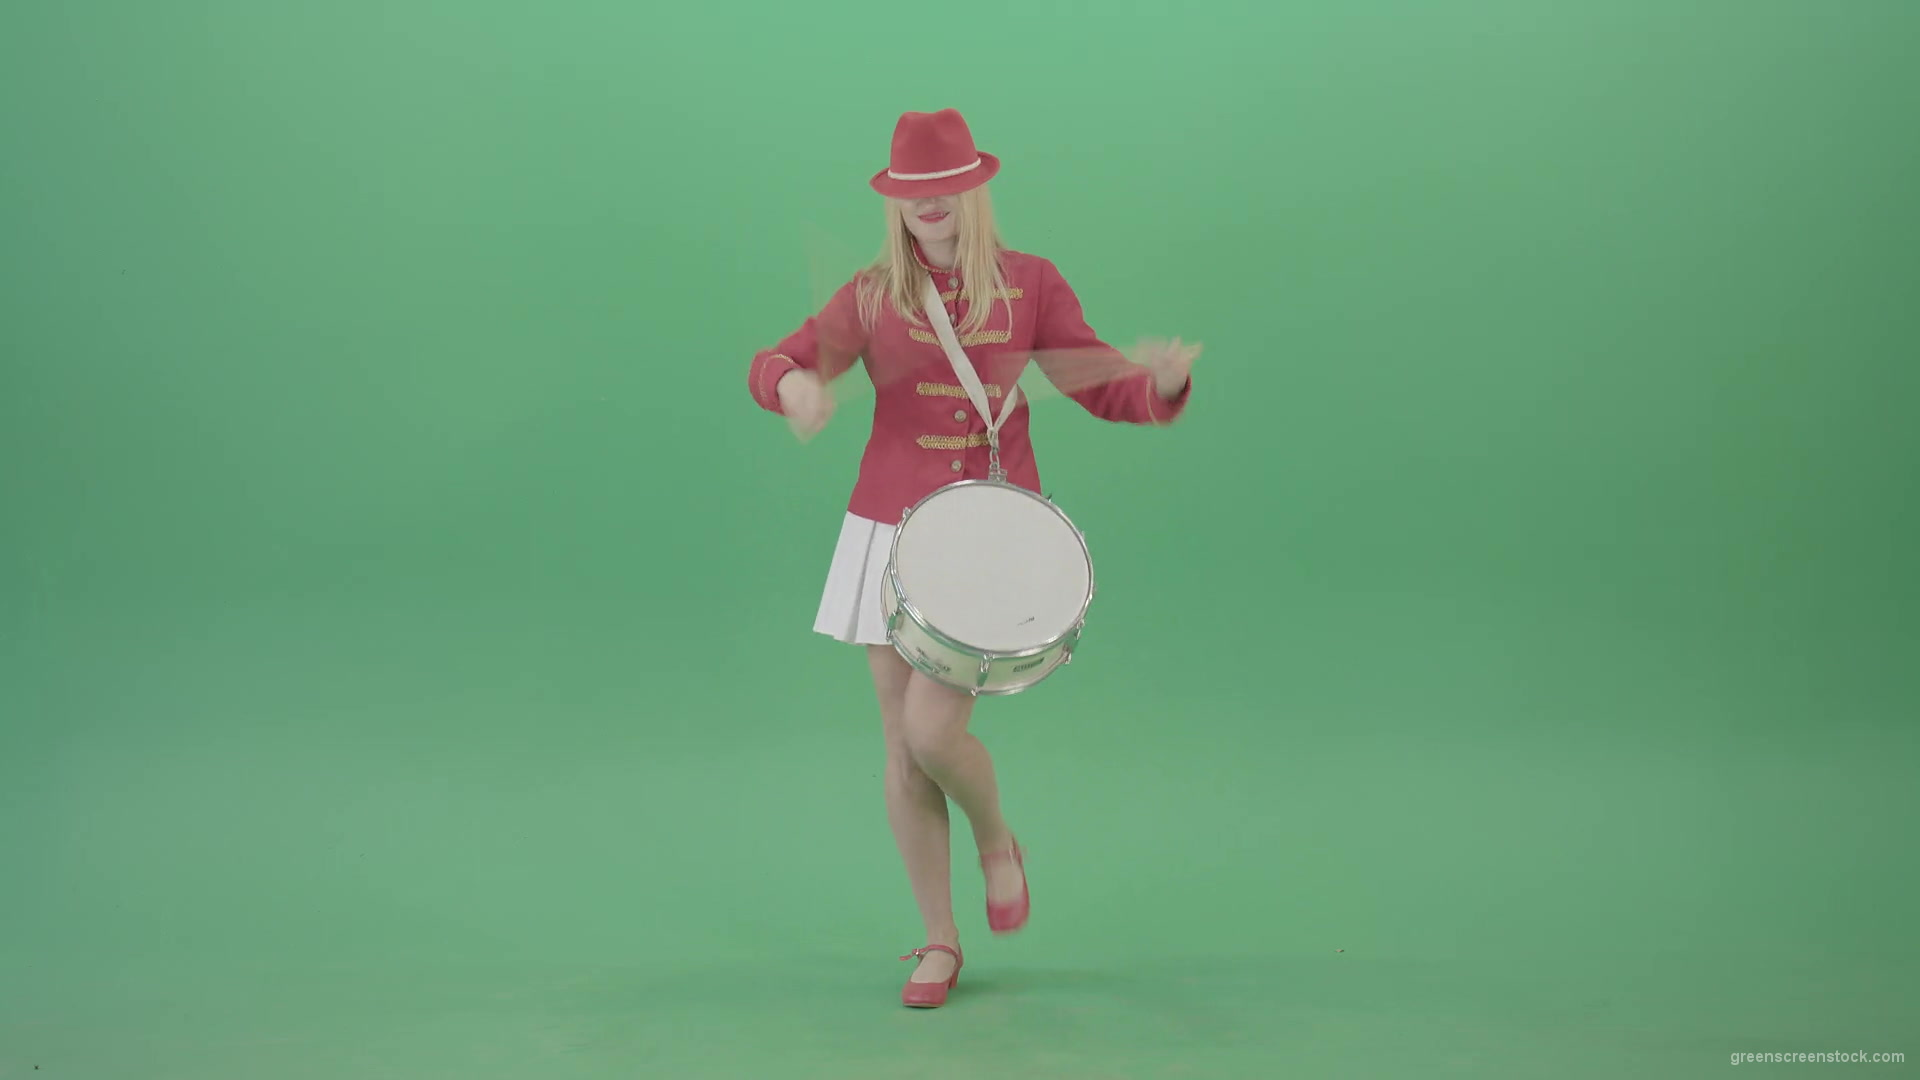 Blonde-Girl-playing-snare-drum-fast-and-marching-on-green-screen-4K-Video-Footage-1920_006 Green Screen Stock